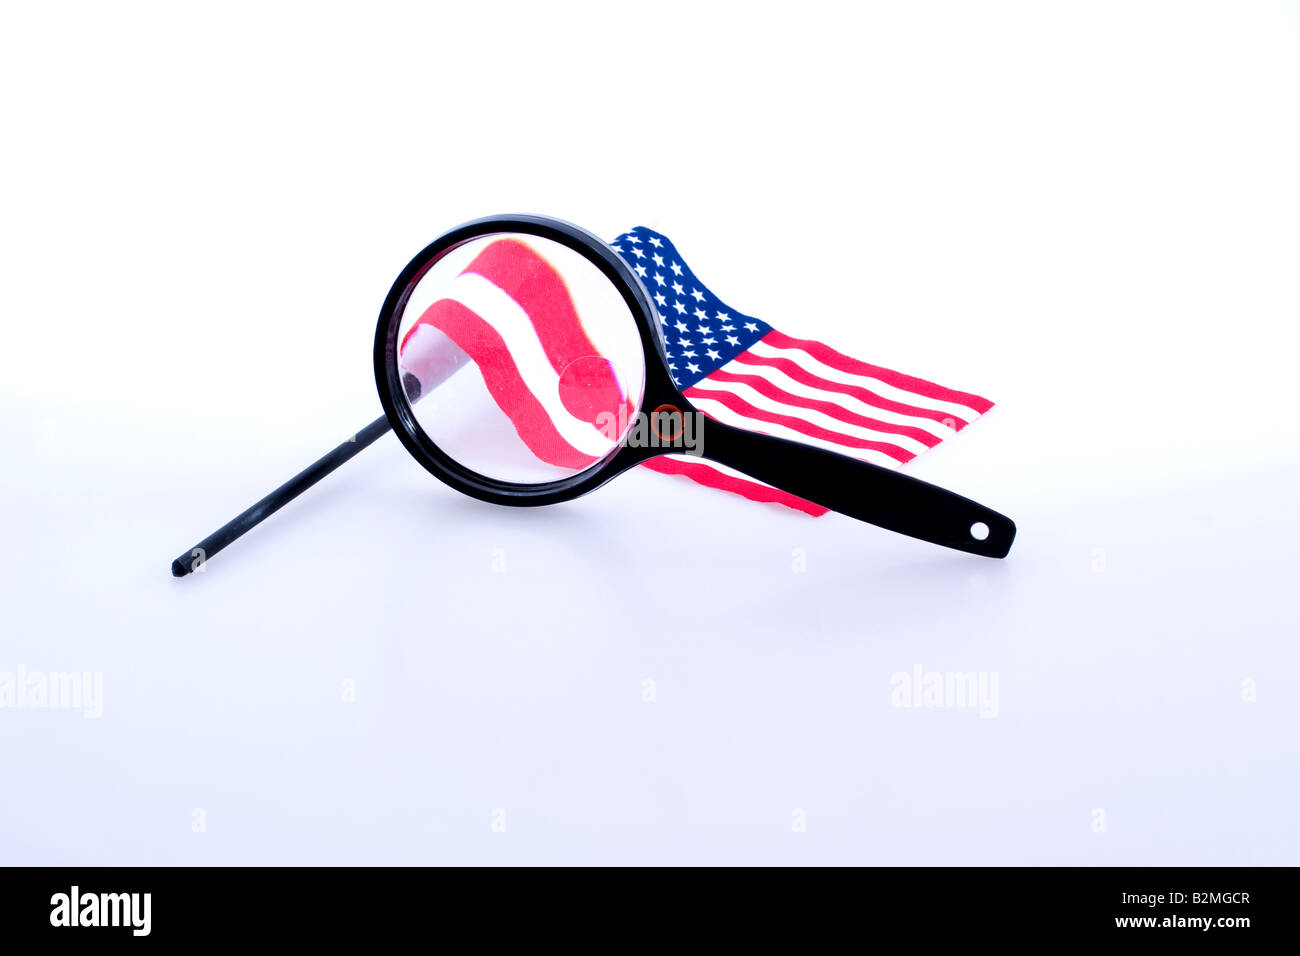 A magnifying glass in from of a United states flag Stock Photo